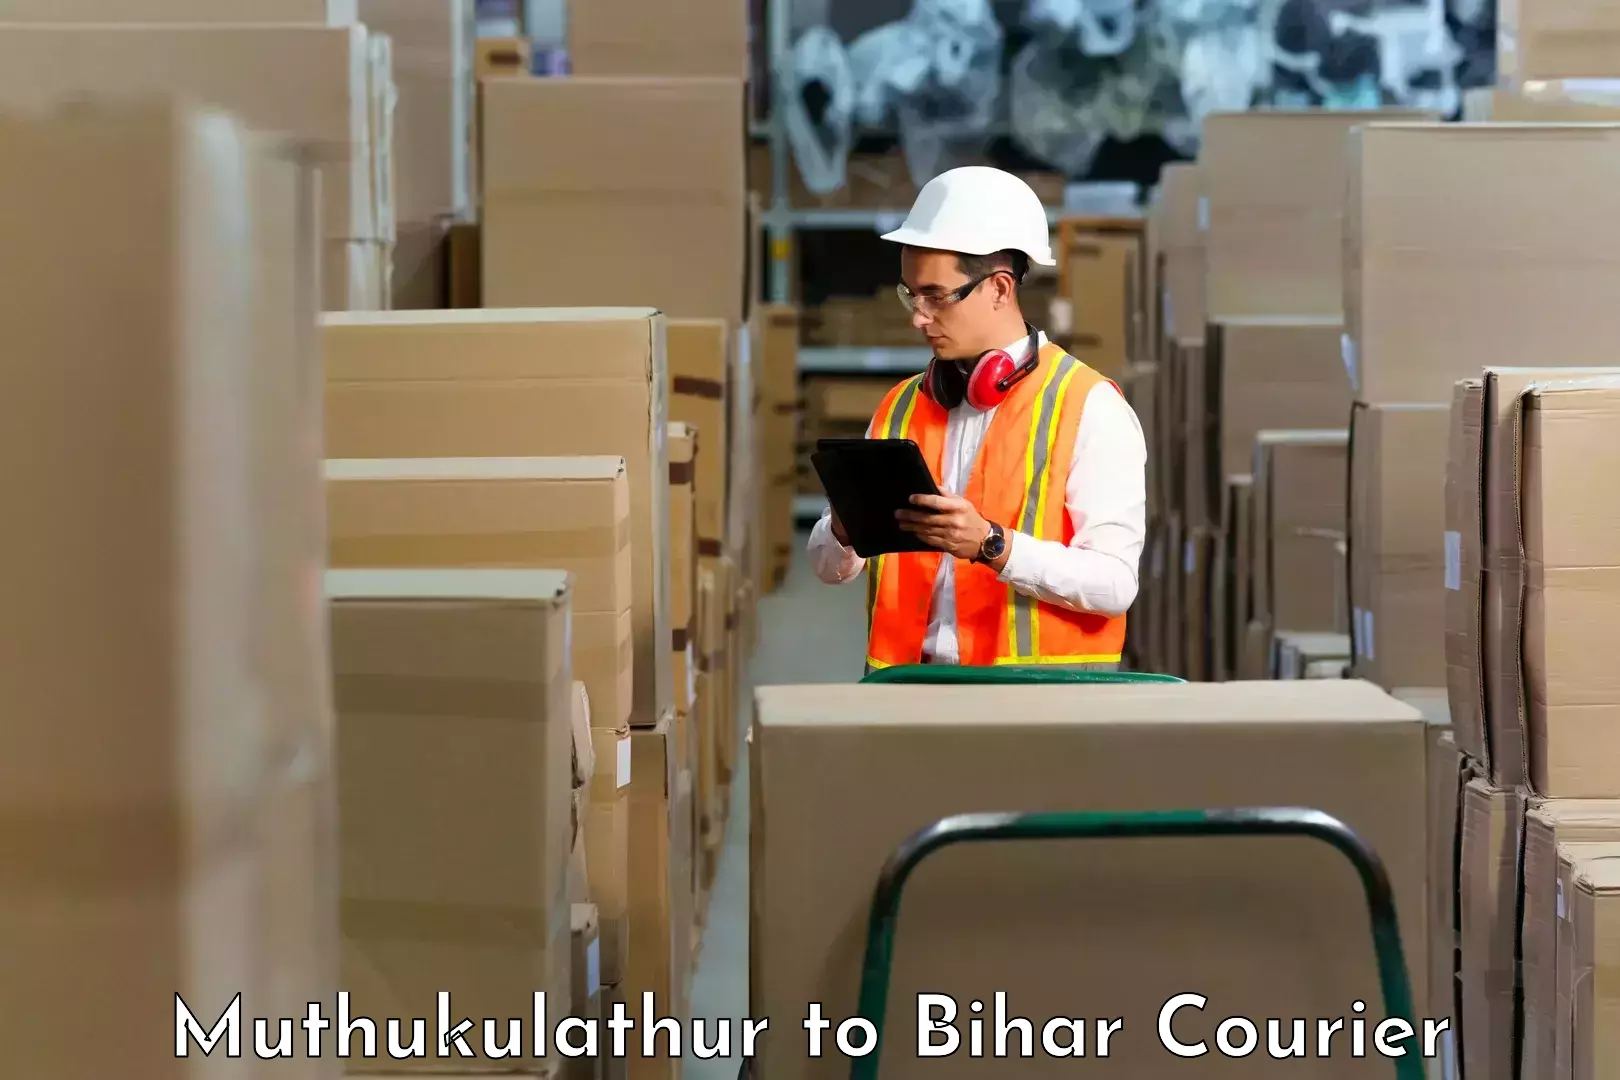 Weekend courier service in Muthukulathur to Bhojpur